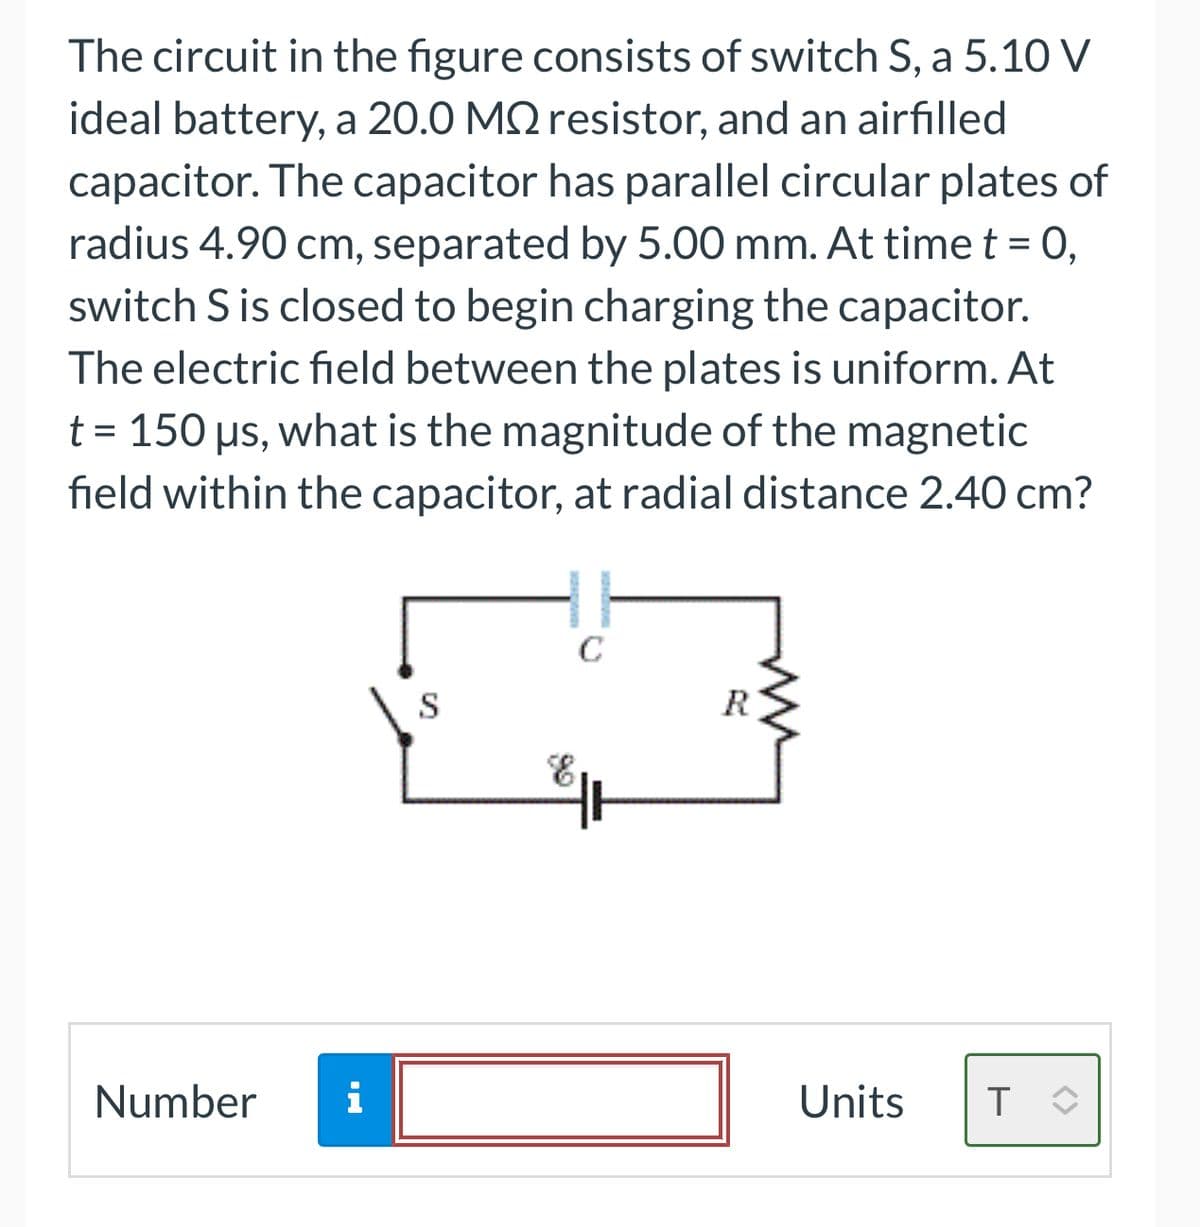 The circuit in the figure consists of switch S, a 5.10 V
ideal battery, a 20.0 MQ resistor, and an airfilled
capacitor. The capacitor has parallel circular plates of
radius 4.90 cm, separated by 5.00 mm. At time t = 0,
switch S is closed to begin charging the capacitor.
The electric field between the plates is uniform. At
t = 150 µs, what is the magnitude of the magnetic
field within the capacitor, at radial distance 2.40 cm?
Number
i
S
C
R
Units
T